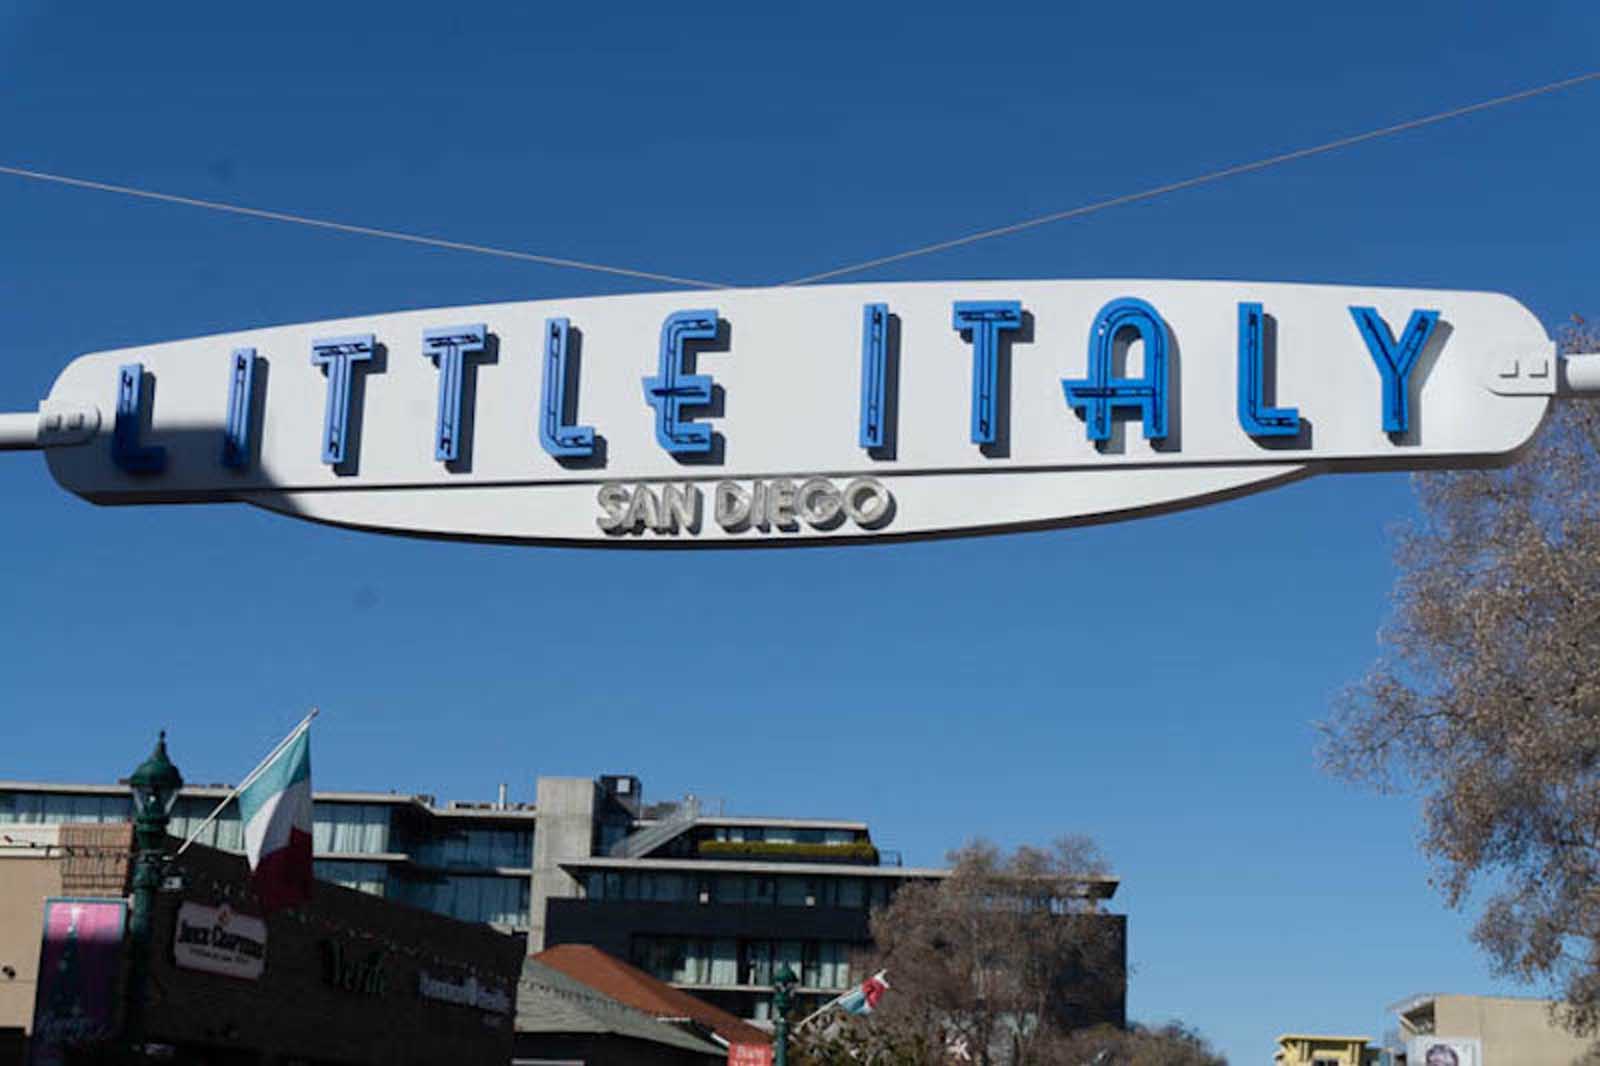 where to eat in san diego little italy